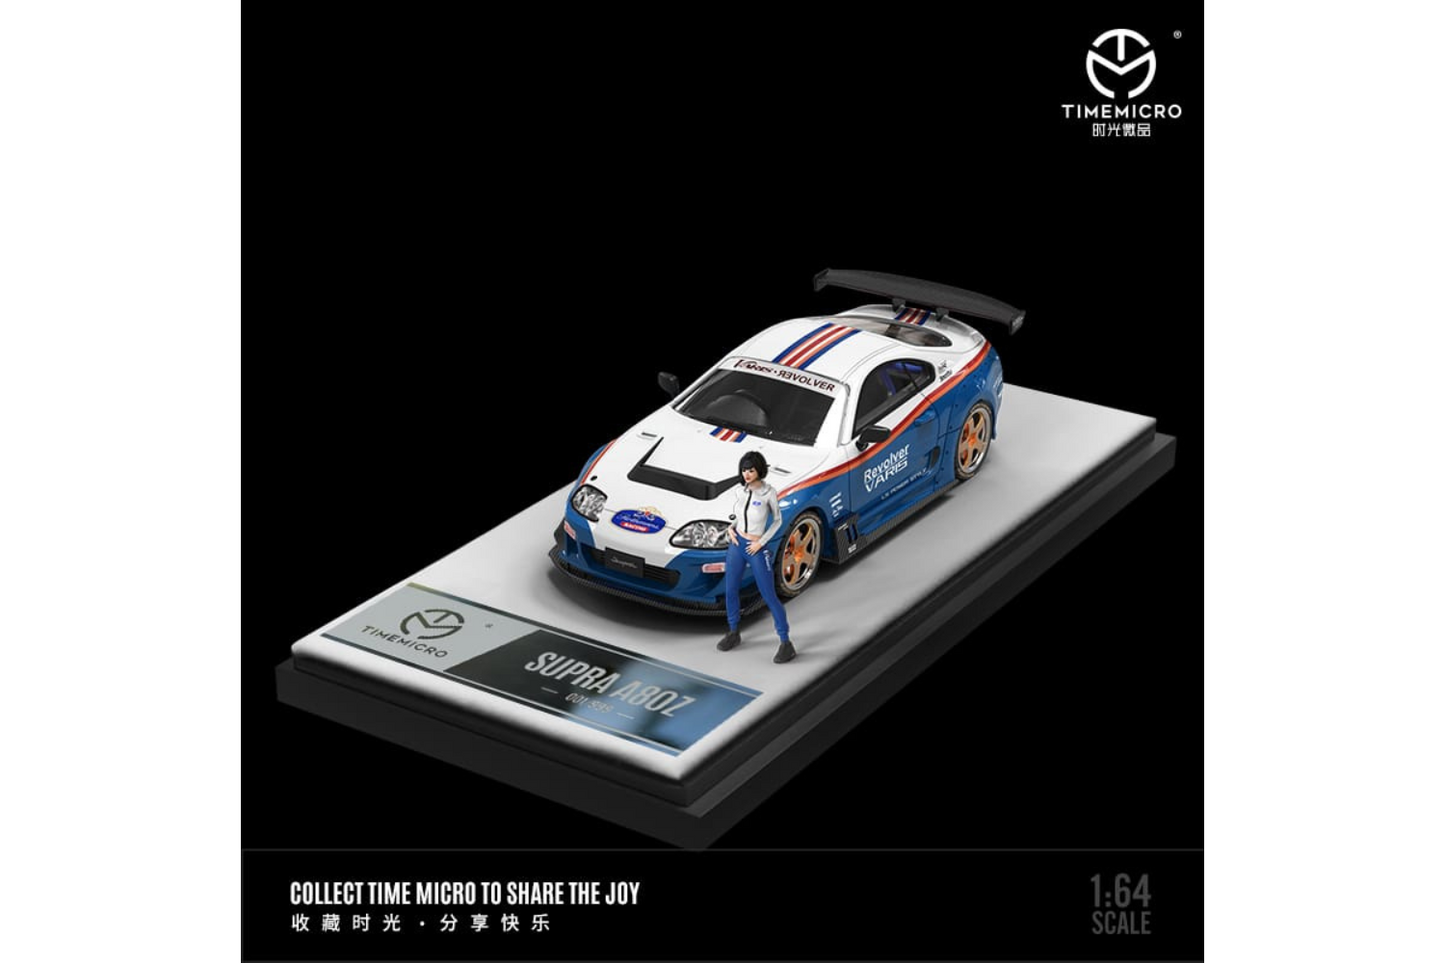 Time Micro 1/64 Toyota Supra (A80) Widebody in Rothmans Livery